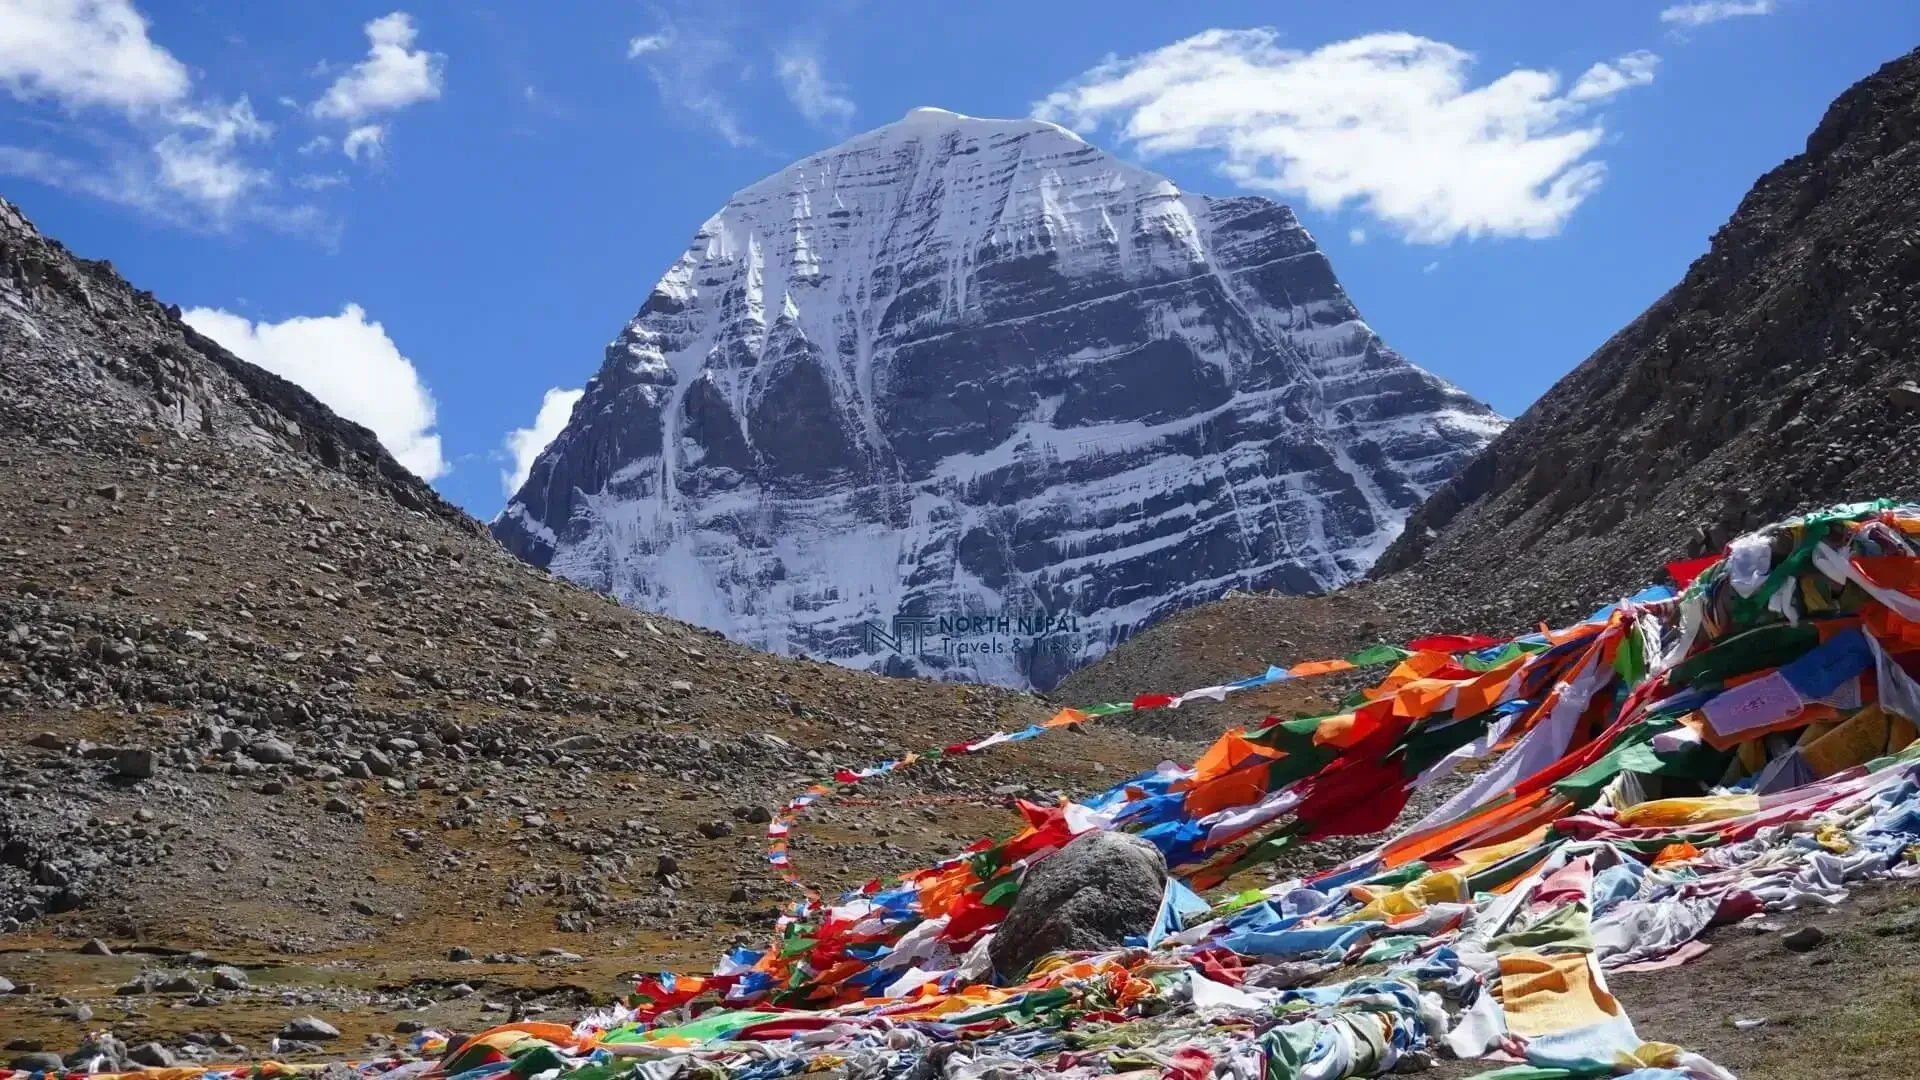 North face view of Mt. Kailash from Deraphuk during the Mansarovar Kailash Parikrama tour organized by North Nepal Travel